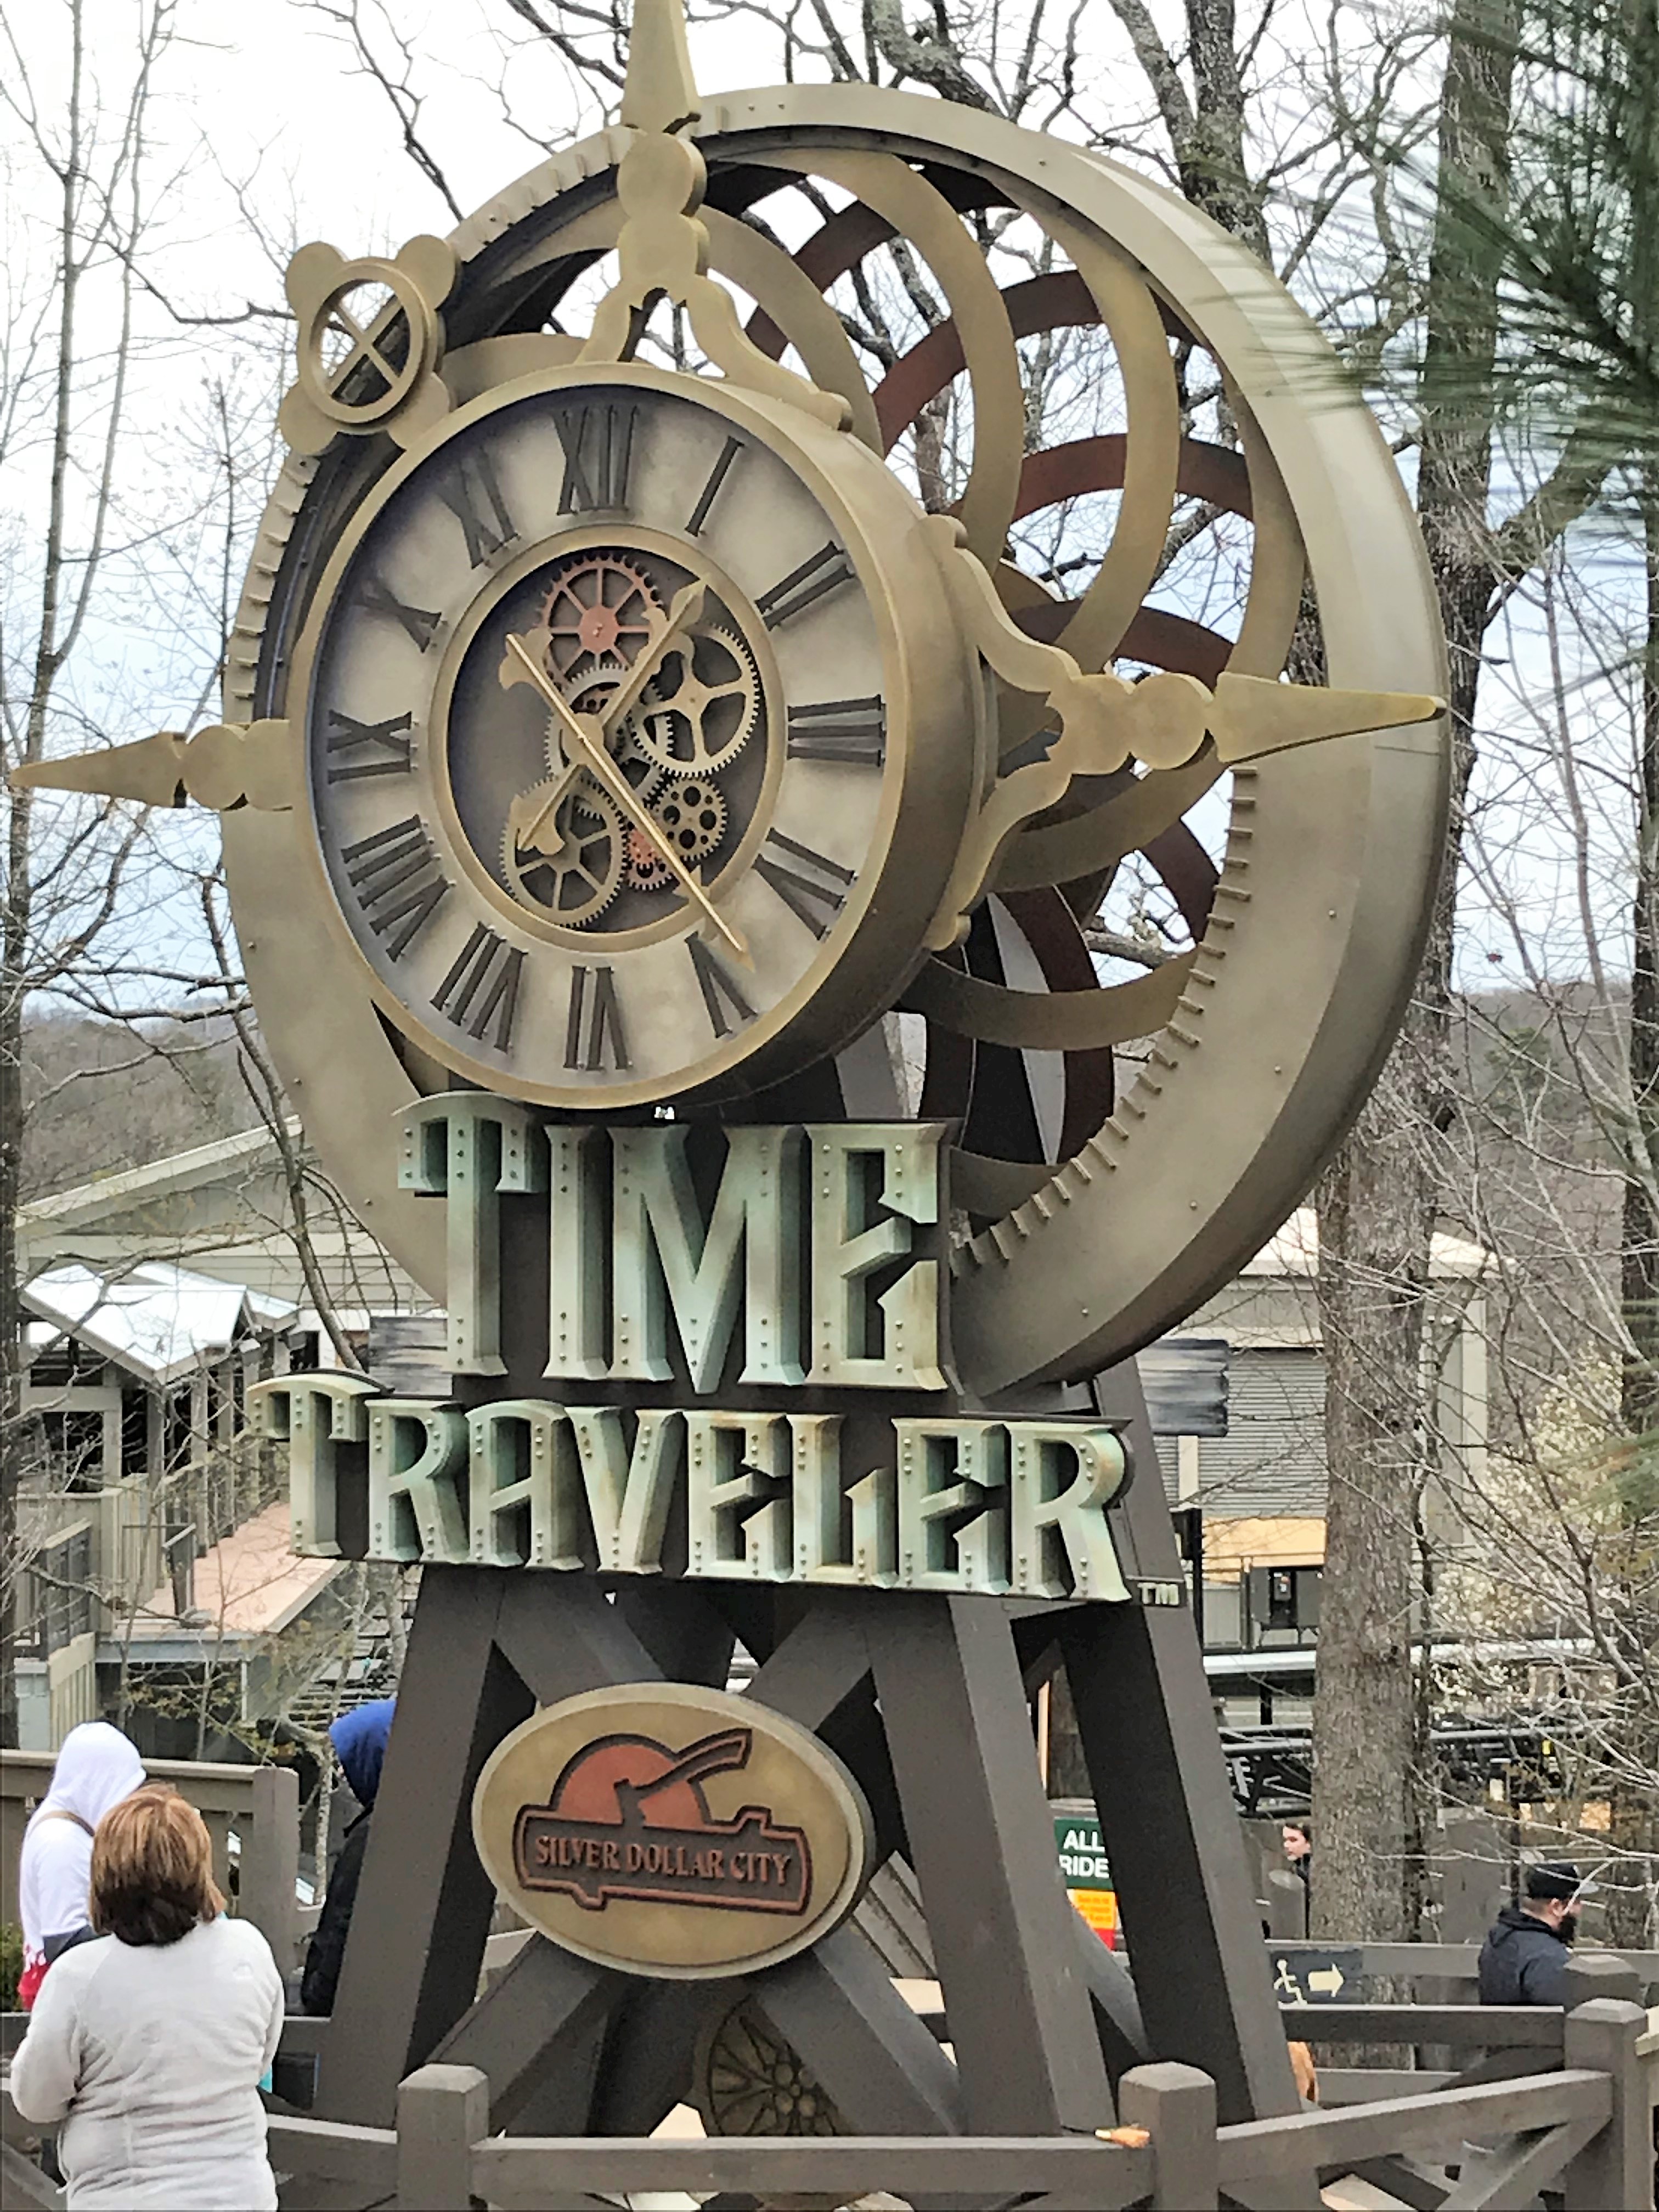 time traveller at silver dollar city